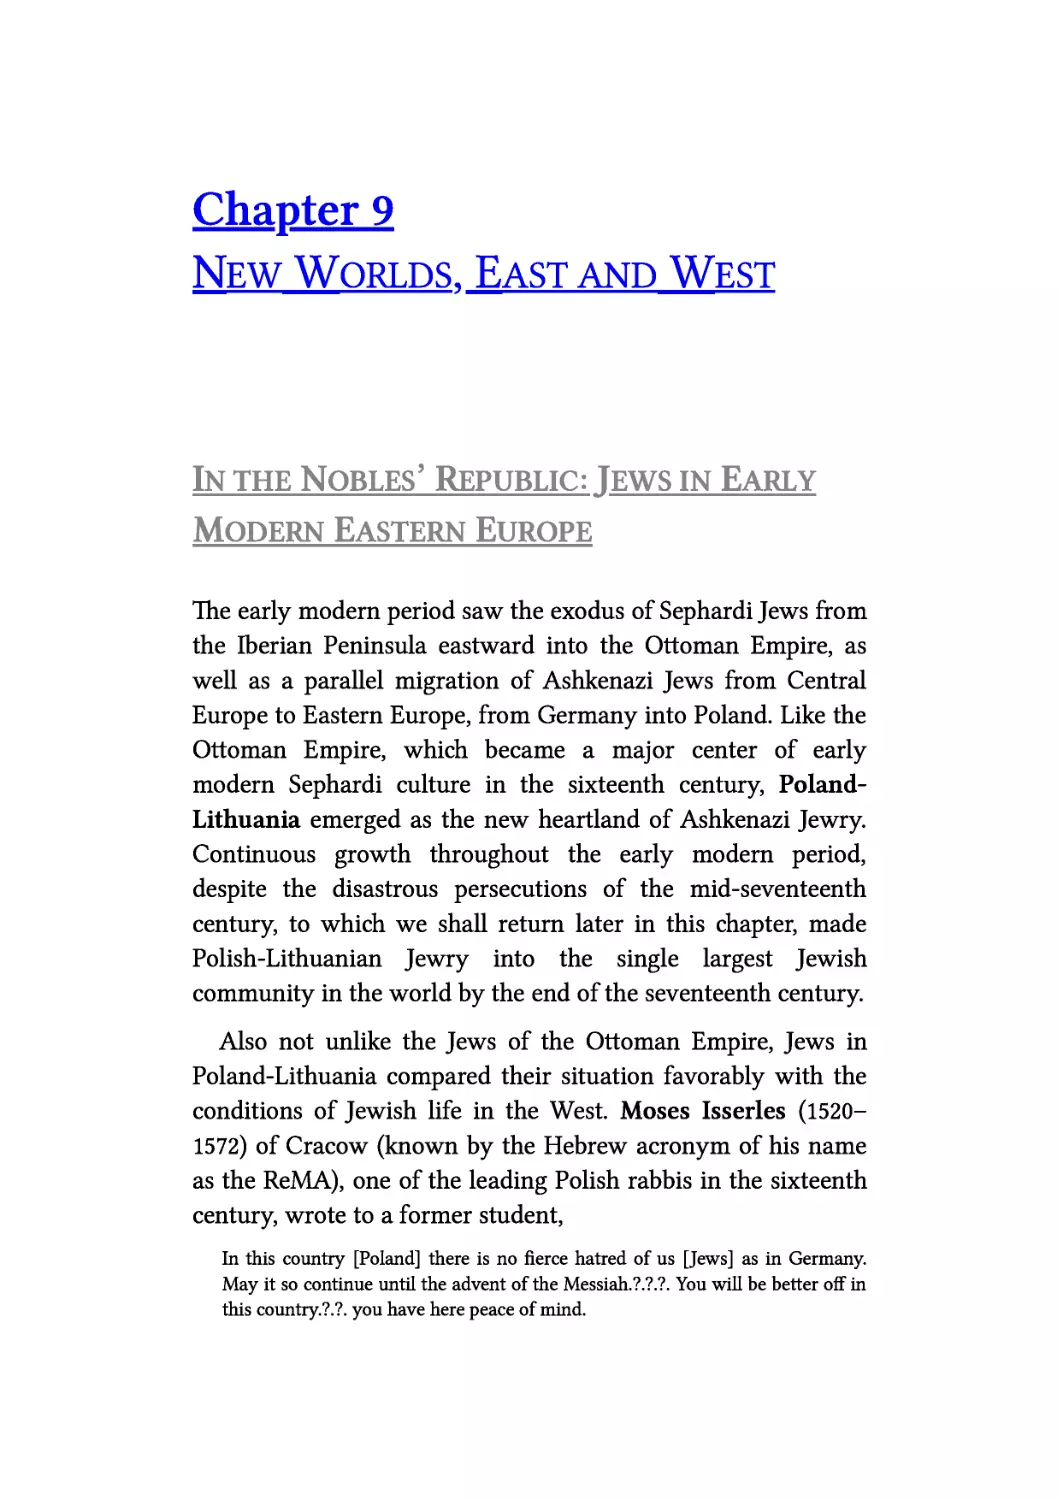 9. New Worlds, East and West